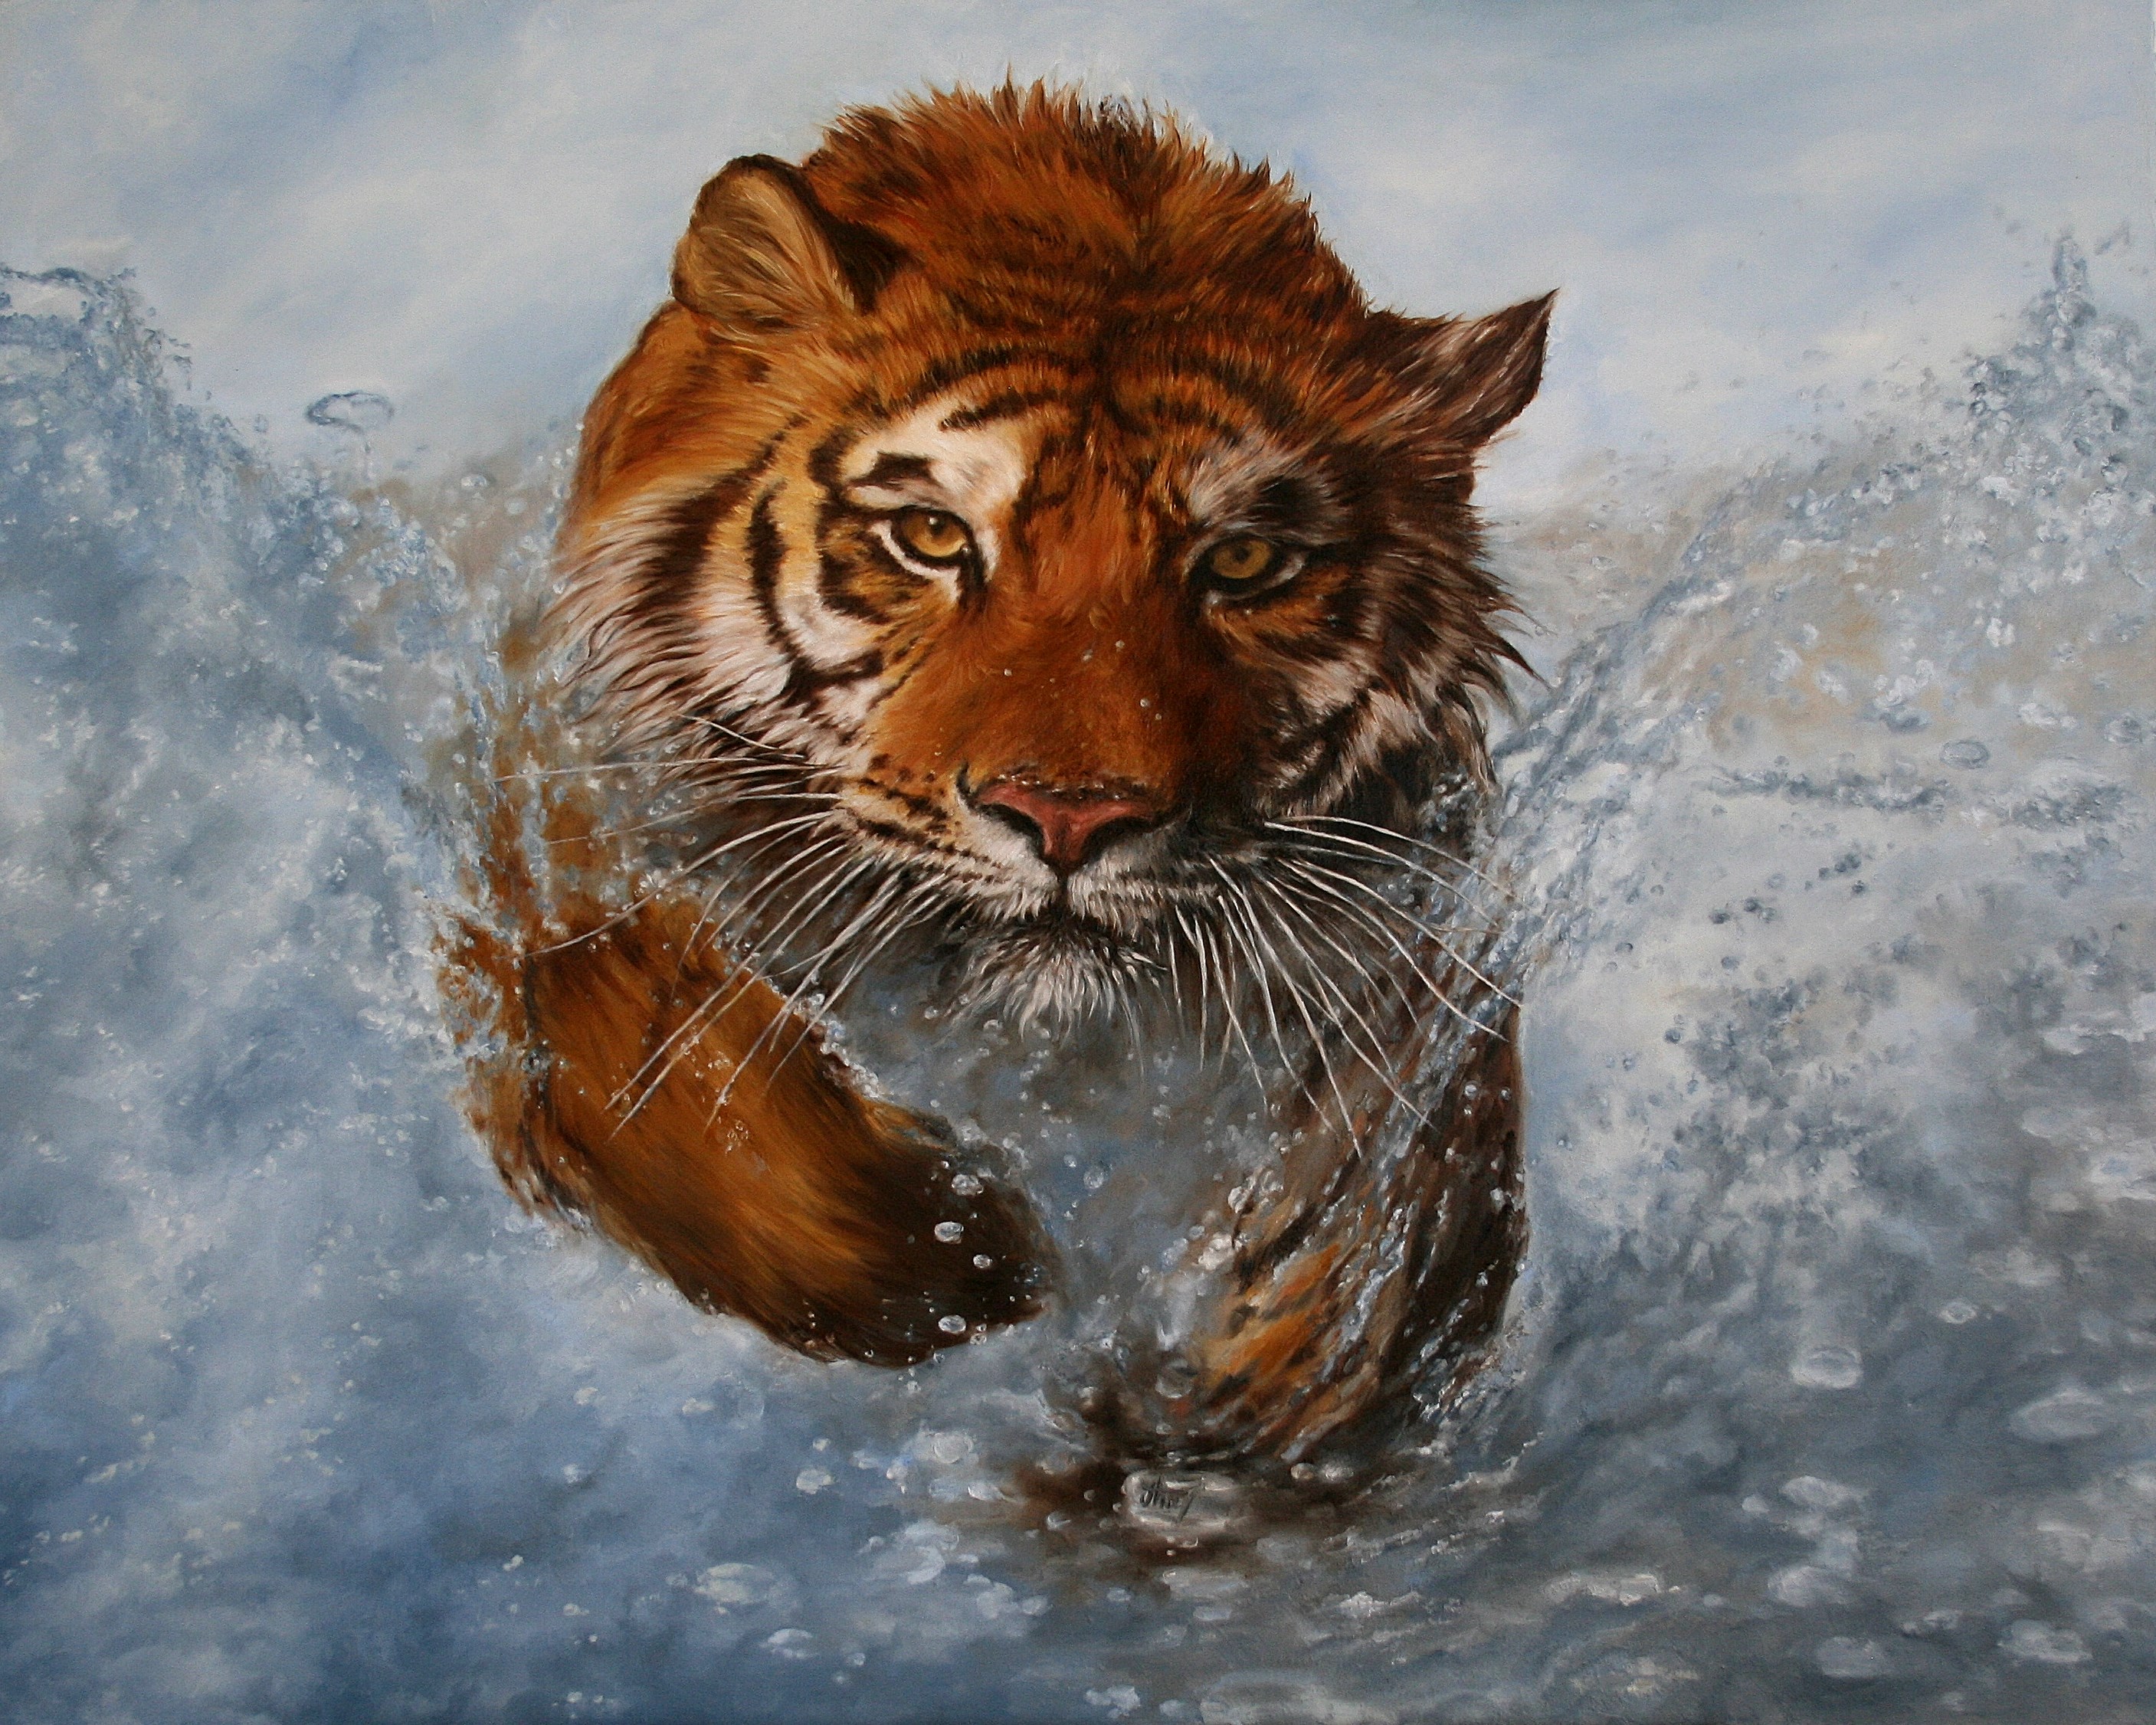 artistic, painting, running, tiger, water